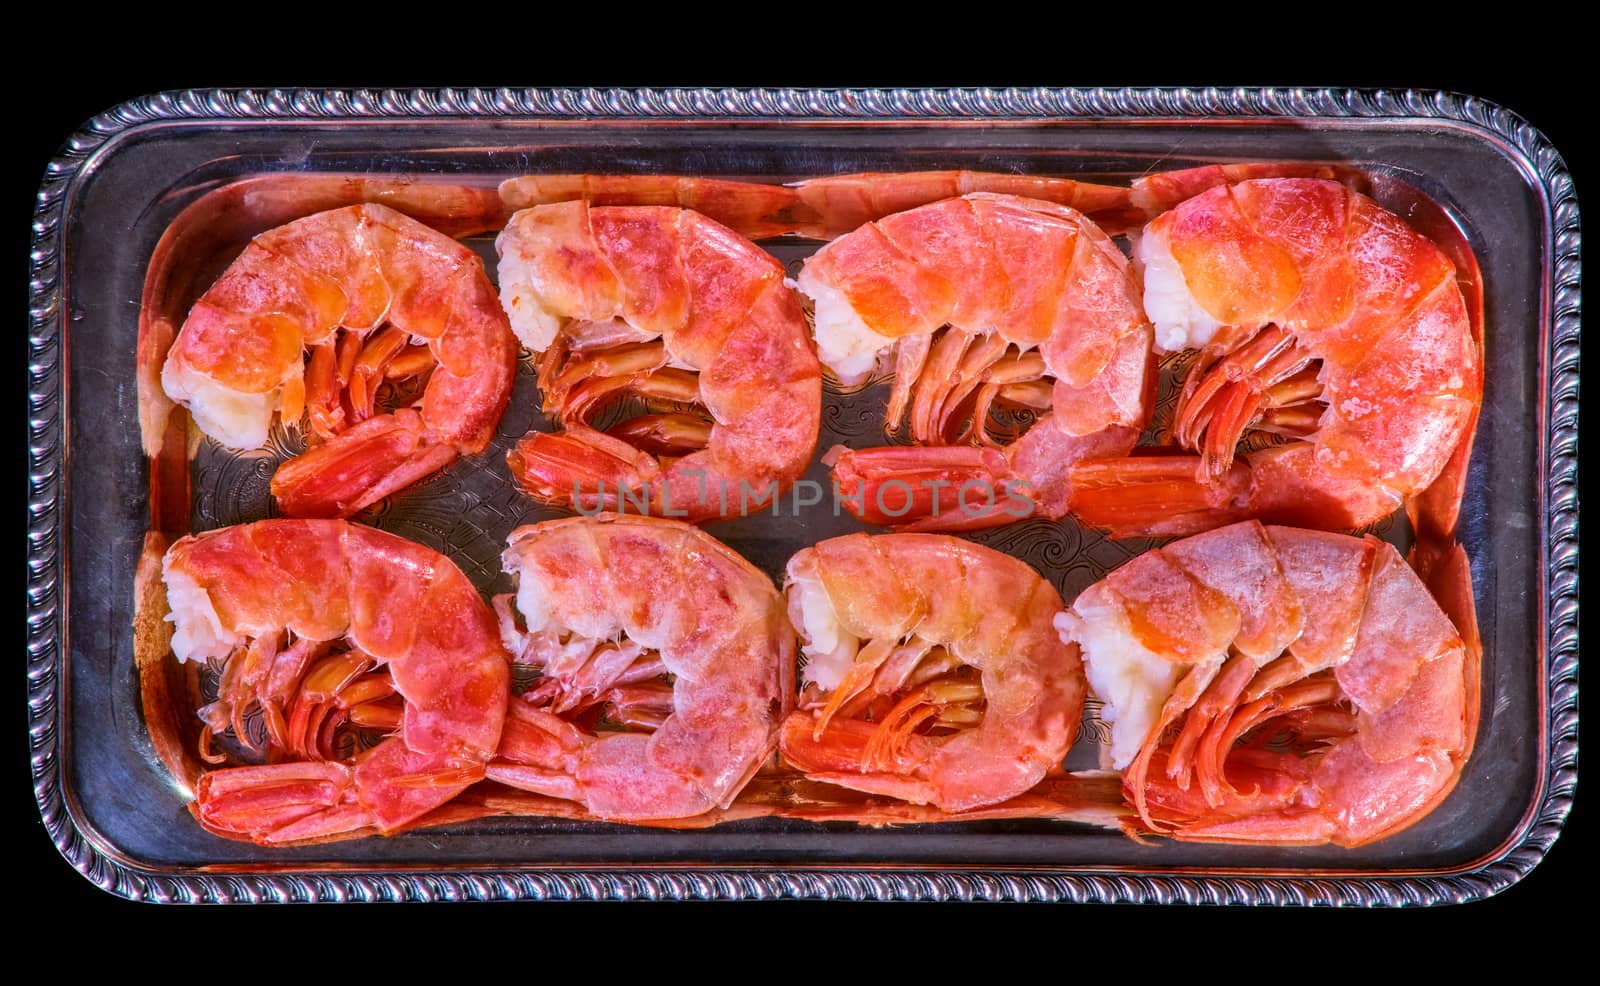 Healthy diet food: boiled wild tiger shrimps close-up on a plate on a table. by Fischeron